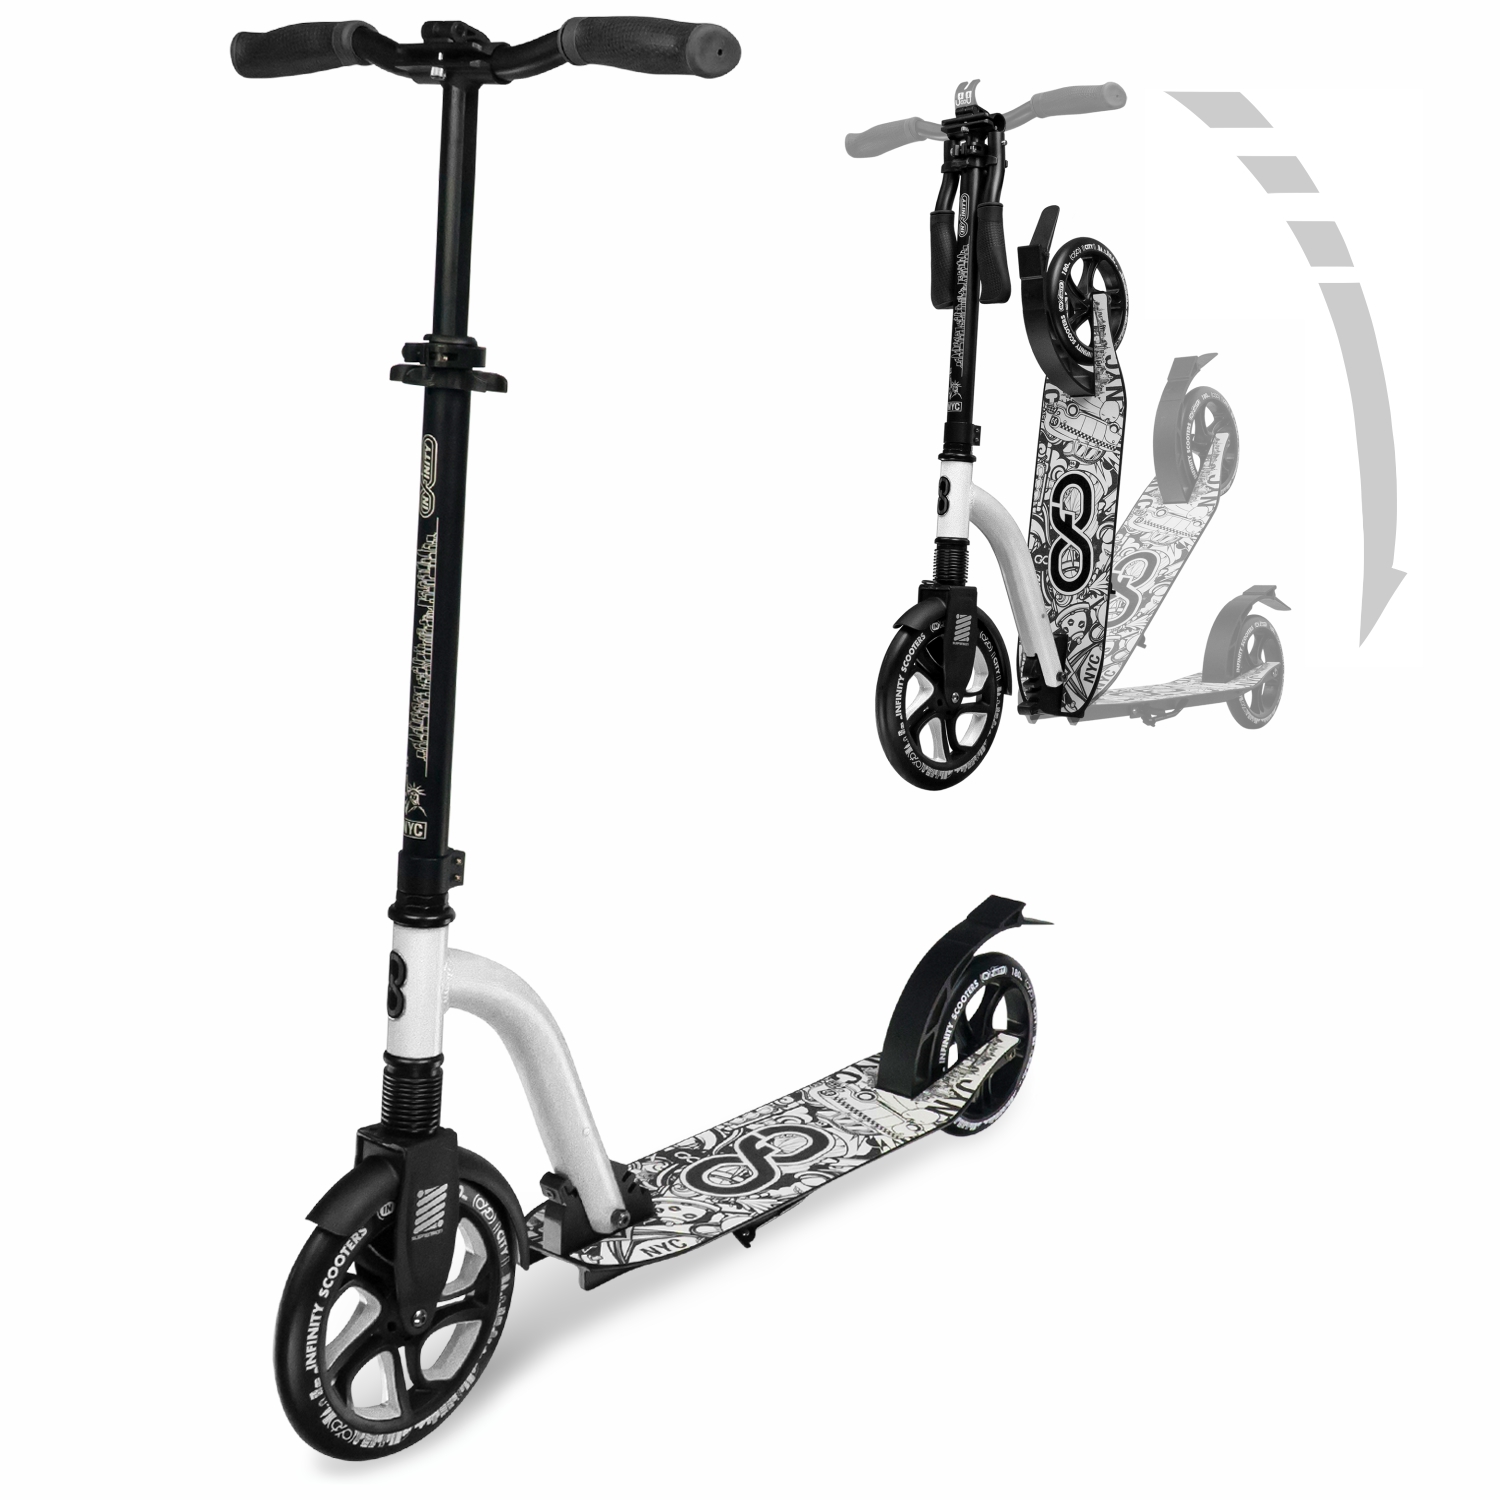 Crazy Skates NYC Foldable Kick Scooter - Great scooters for teens and adults-...